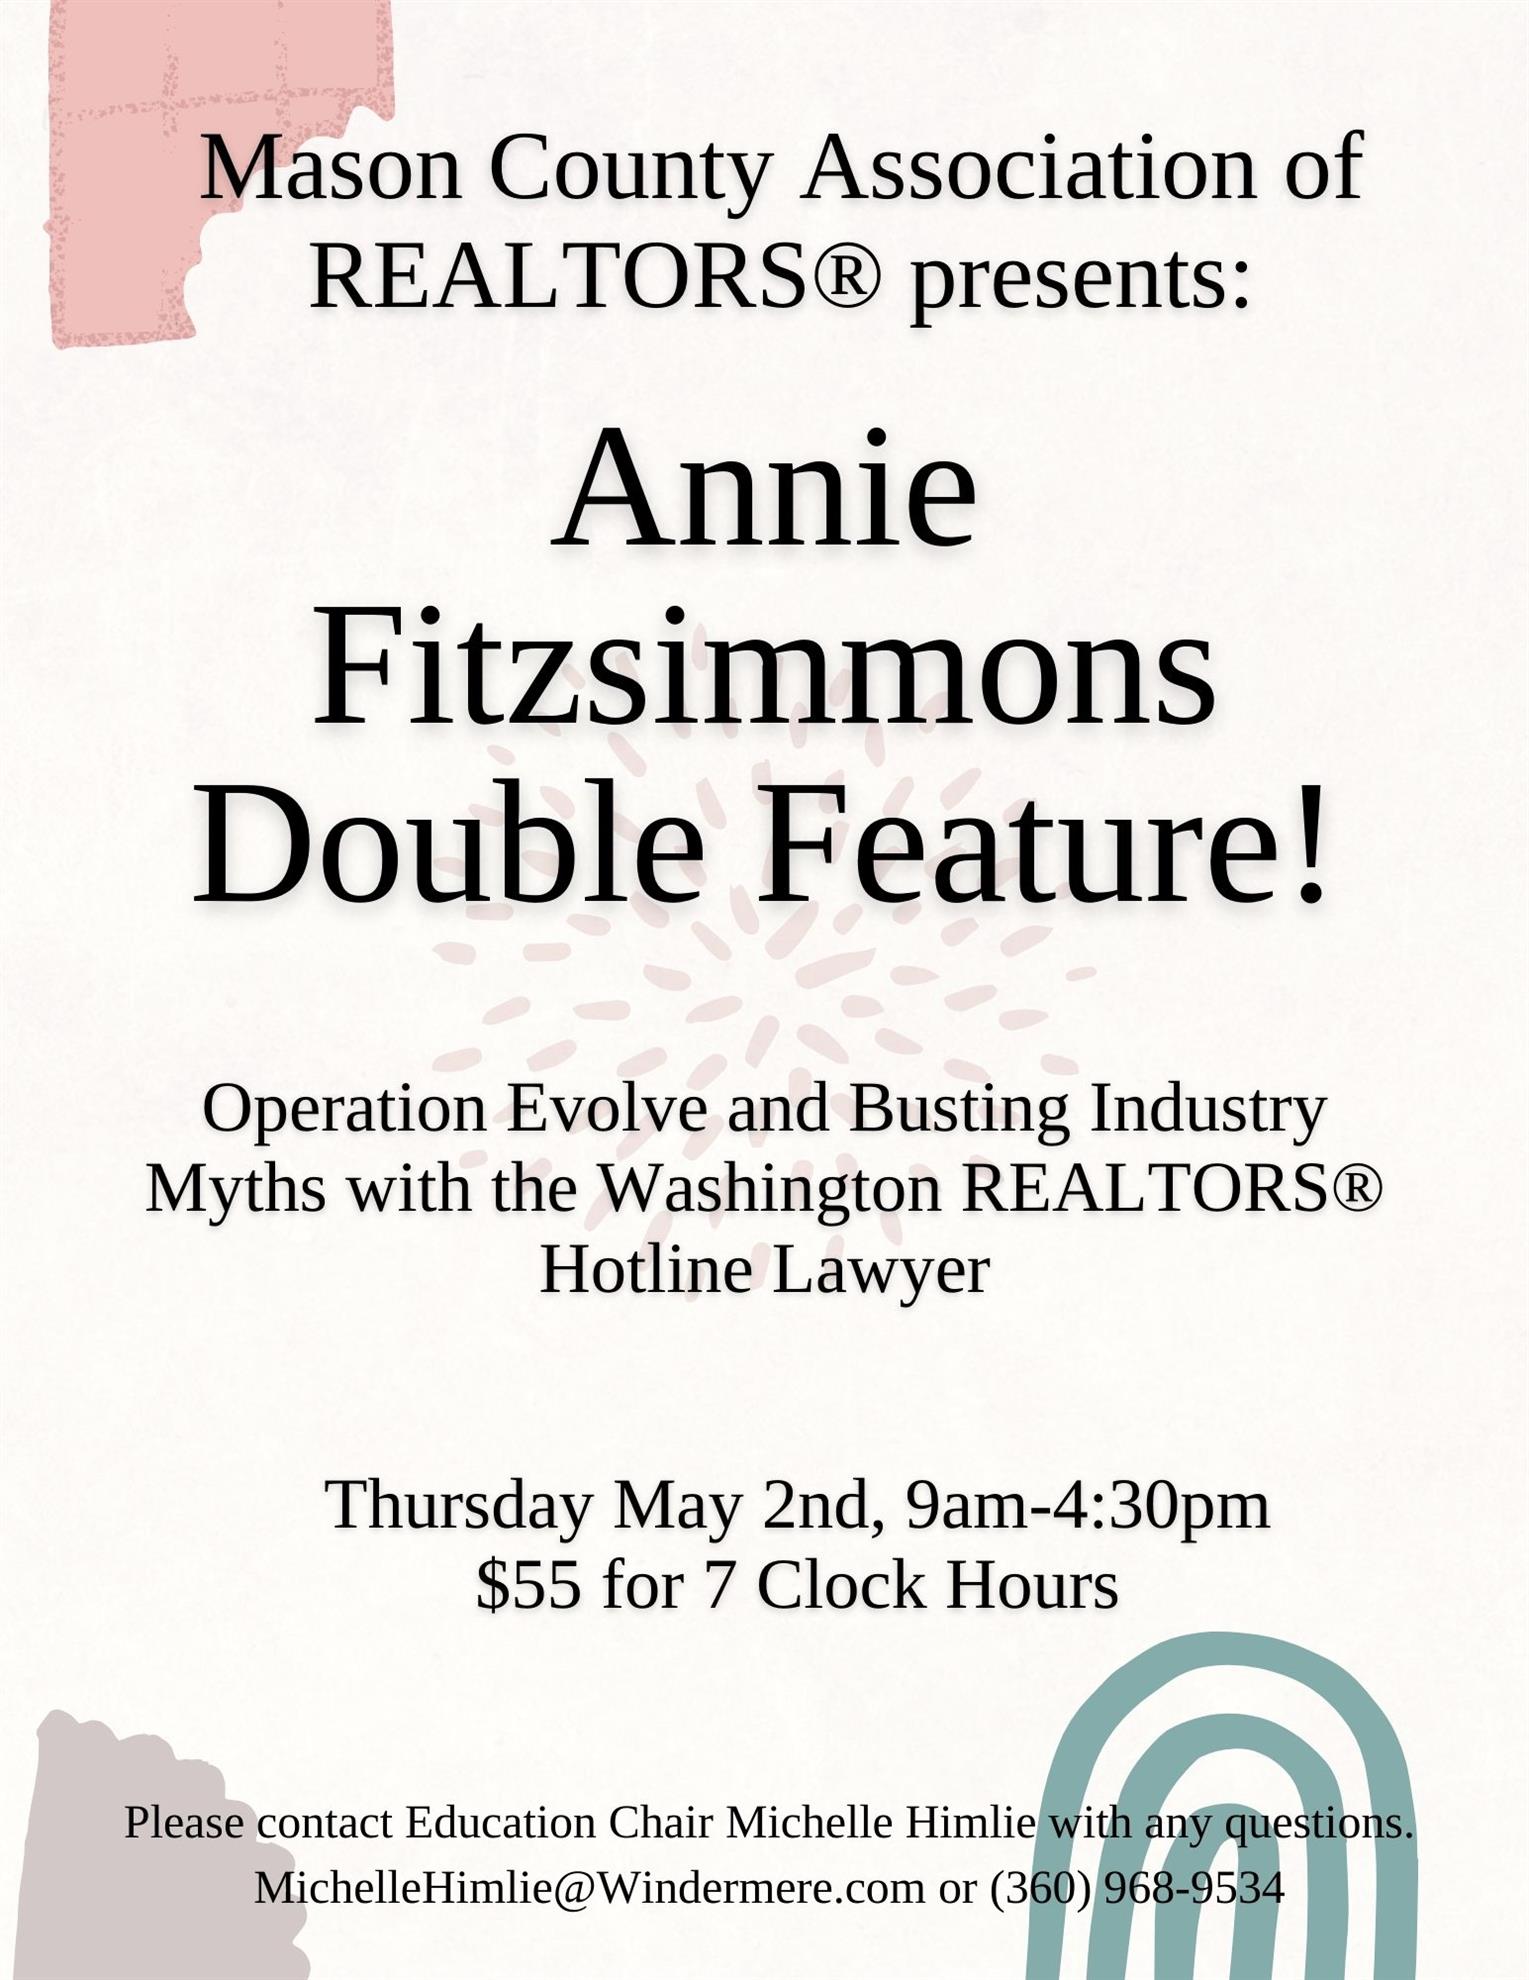 Annie Fitzsimmons Double Feature